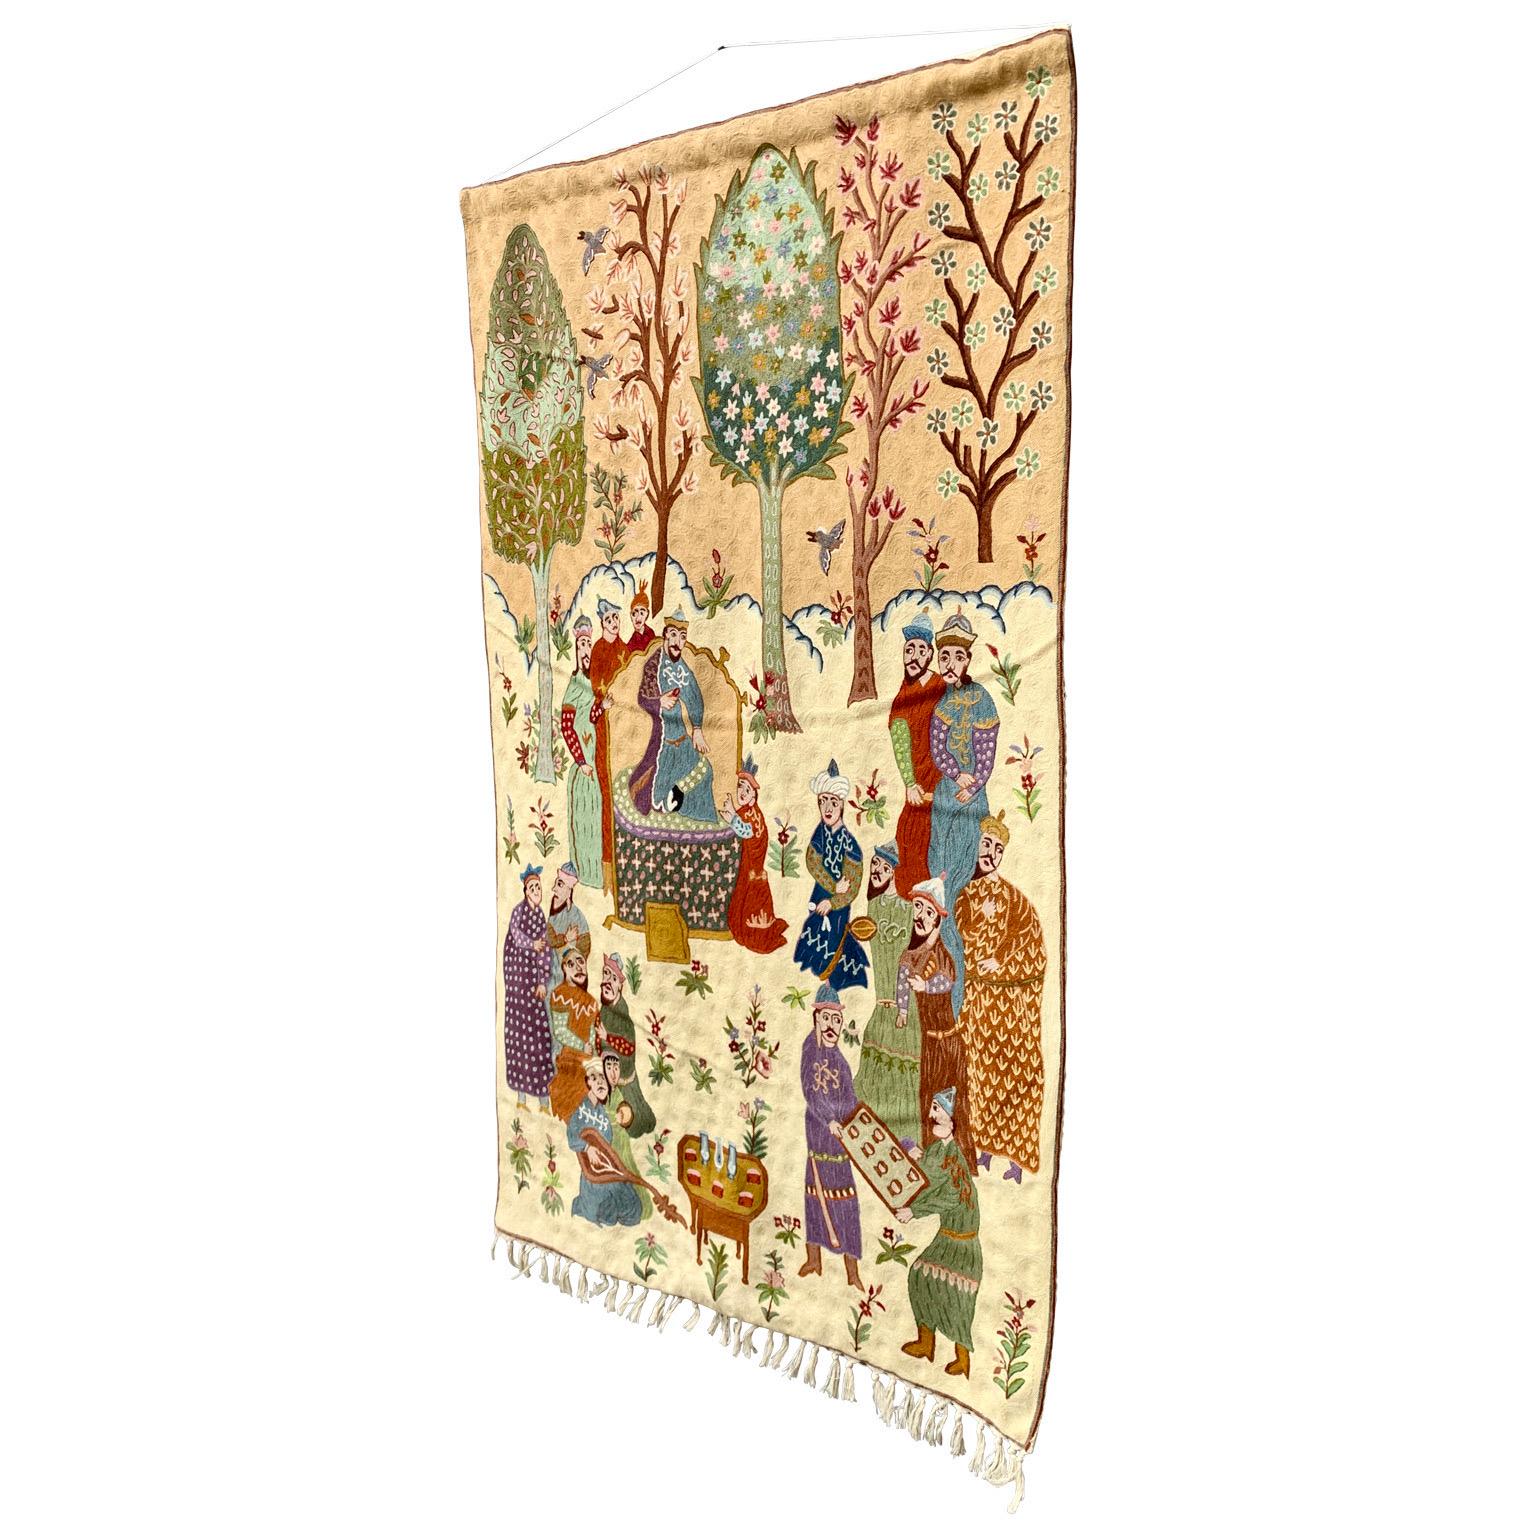 A Mid-Century Modern Semi-Antique handmade Indian (Kashmir region) rug dating around 1960. This embroidered art work representing scenes of a feast among royalties and noble people, was imported by the notorious Swedish design home NK in Stockholm,